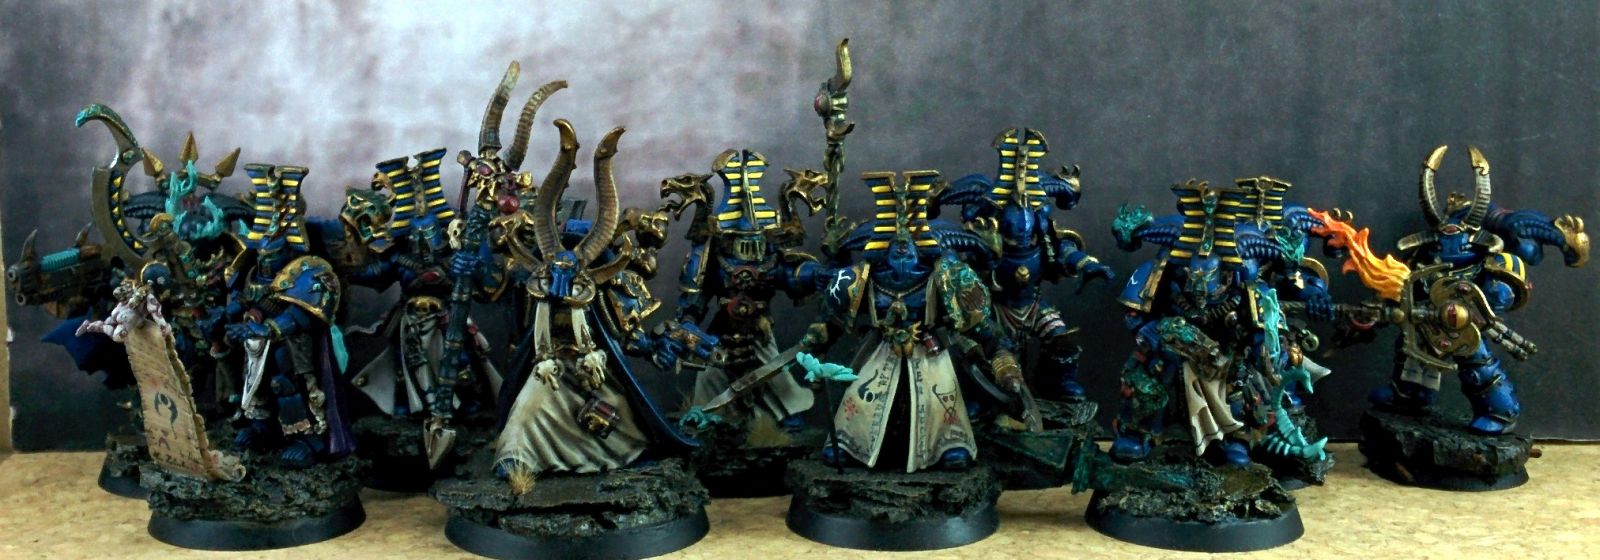 Aasfressers Thousand Sons